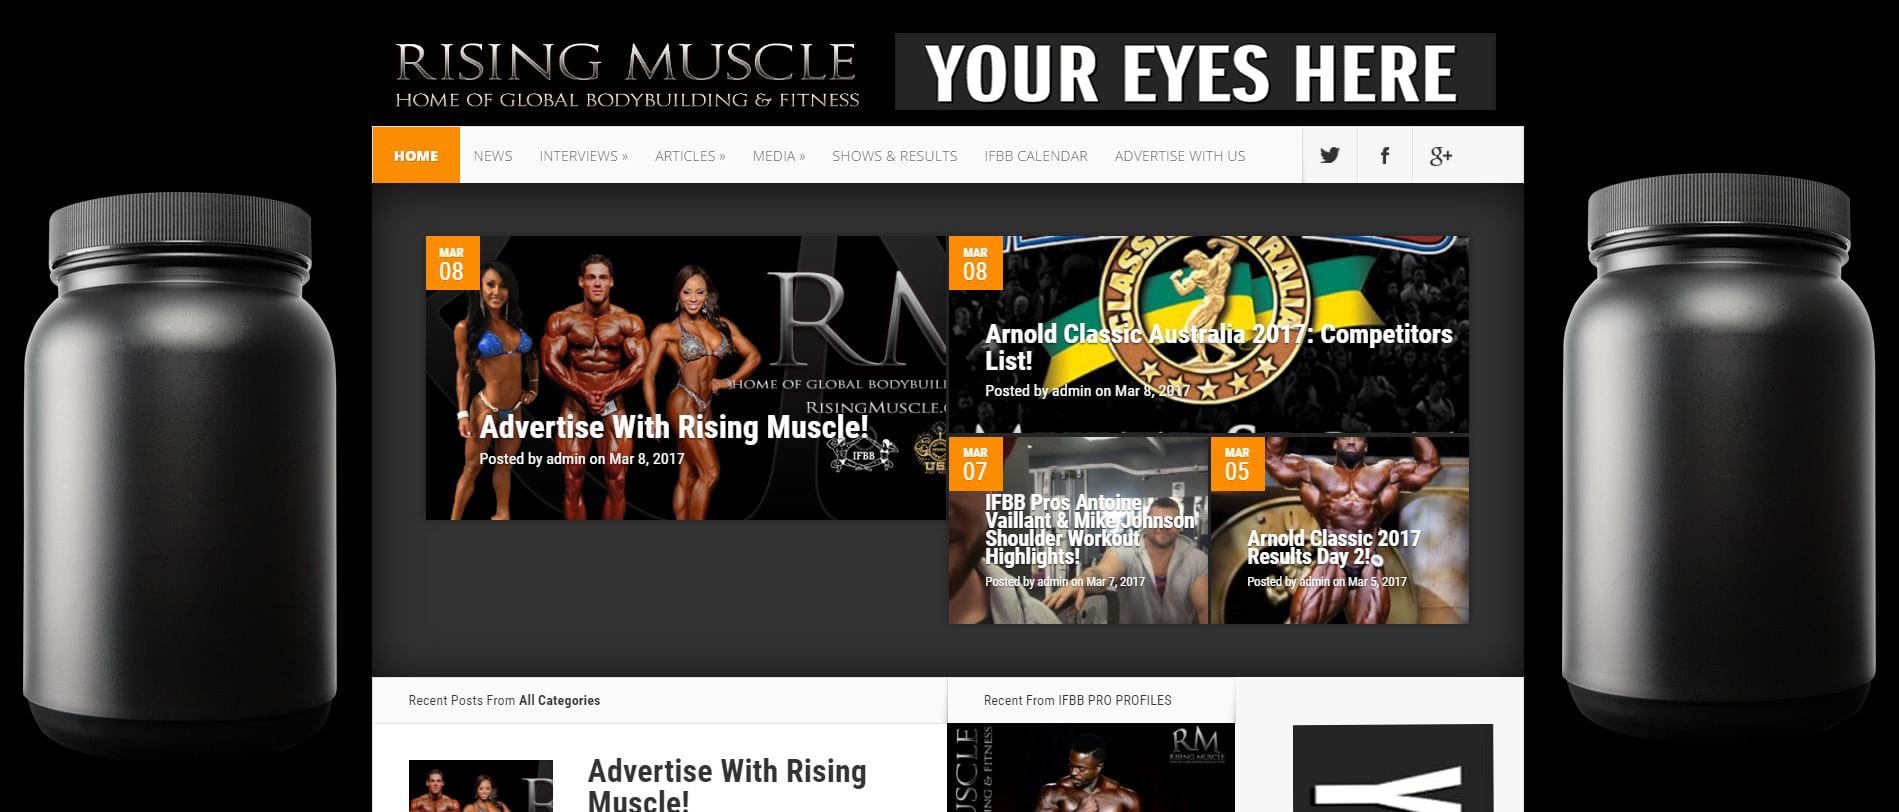 111 1 Advertise with Rising Muscle!